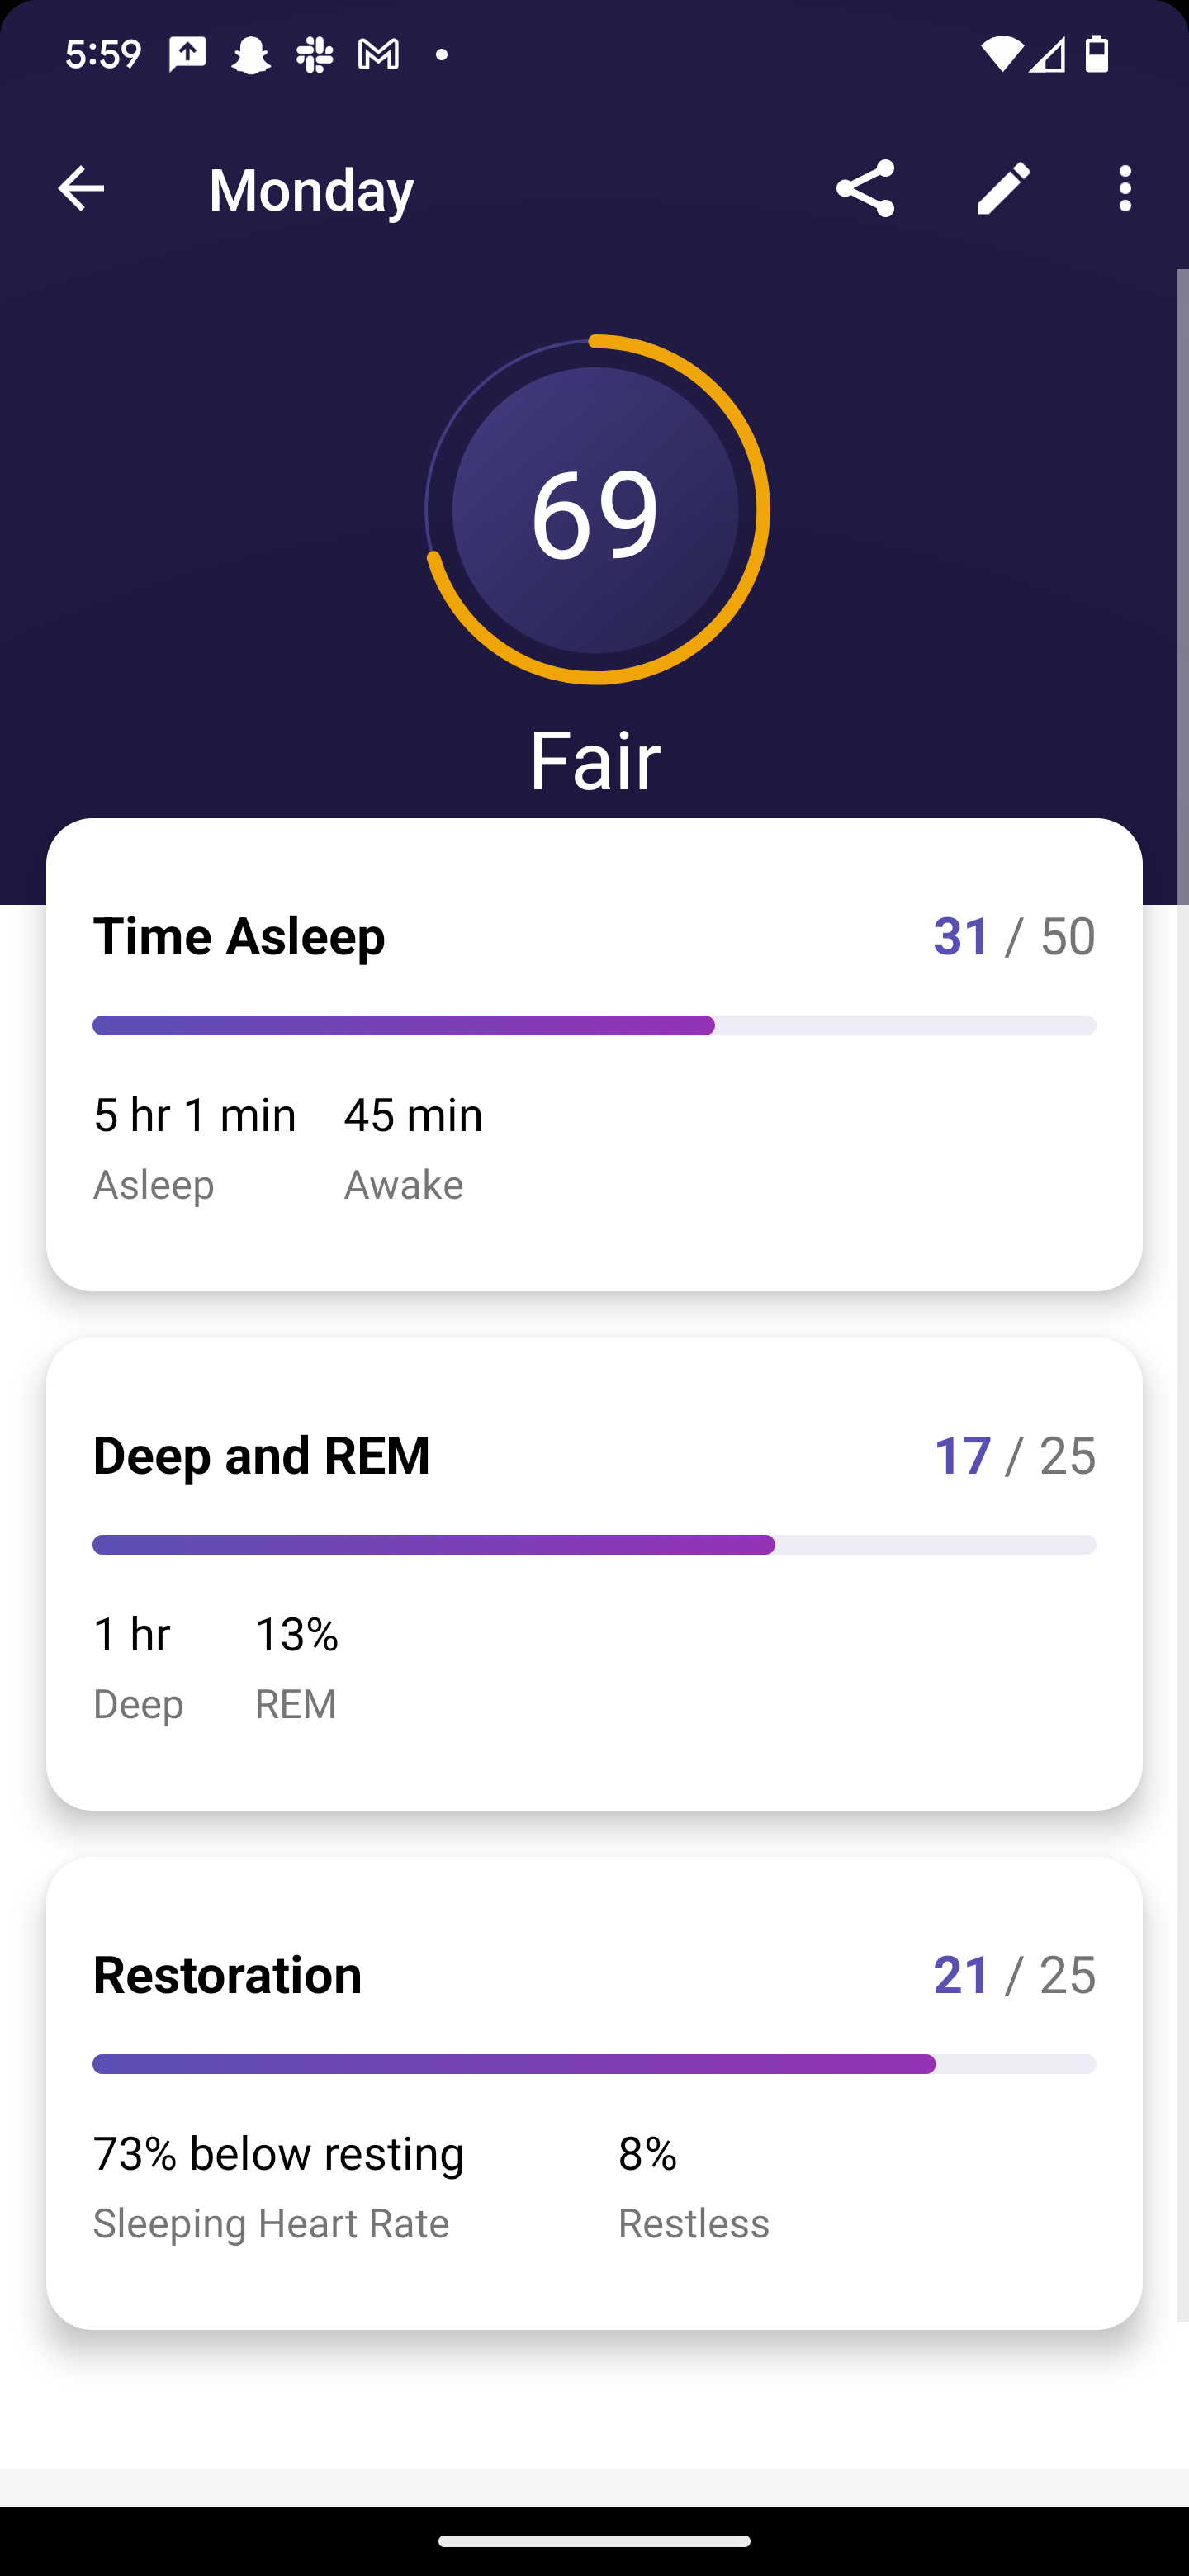 Sleep tracking insights on the Fitbit app using Pixel Watch data.